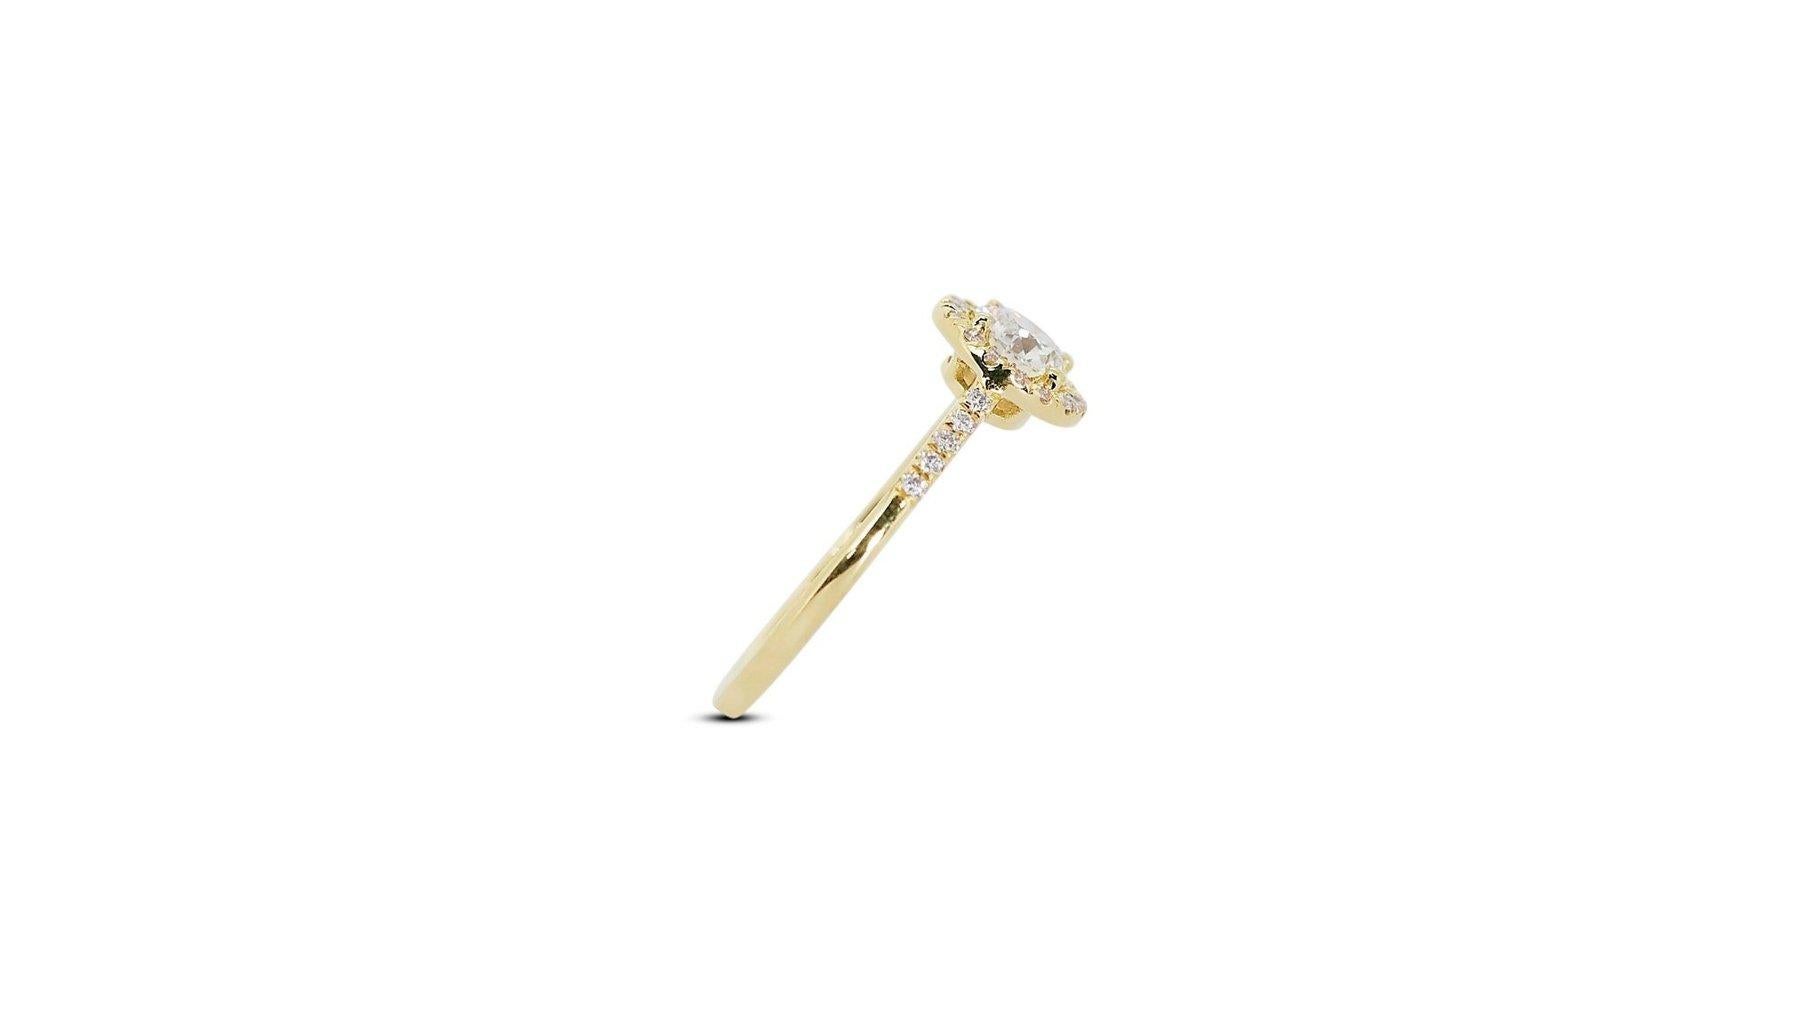 Dazzling 1.36ct Diamonds Halo Ring in 18k Yellow Gold - GIA Certified For Sale 1